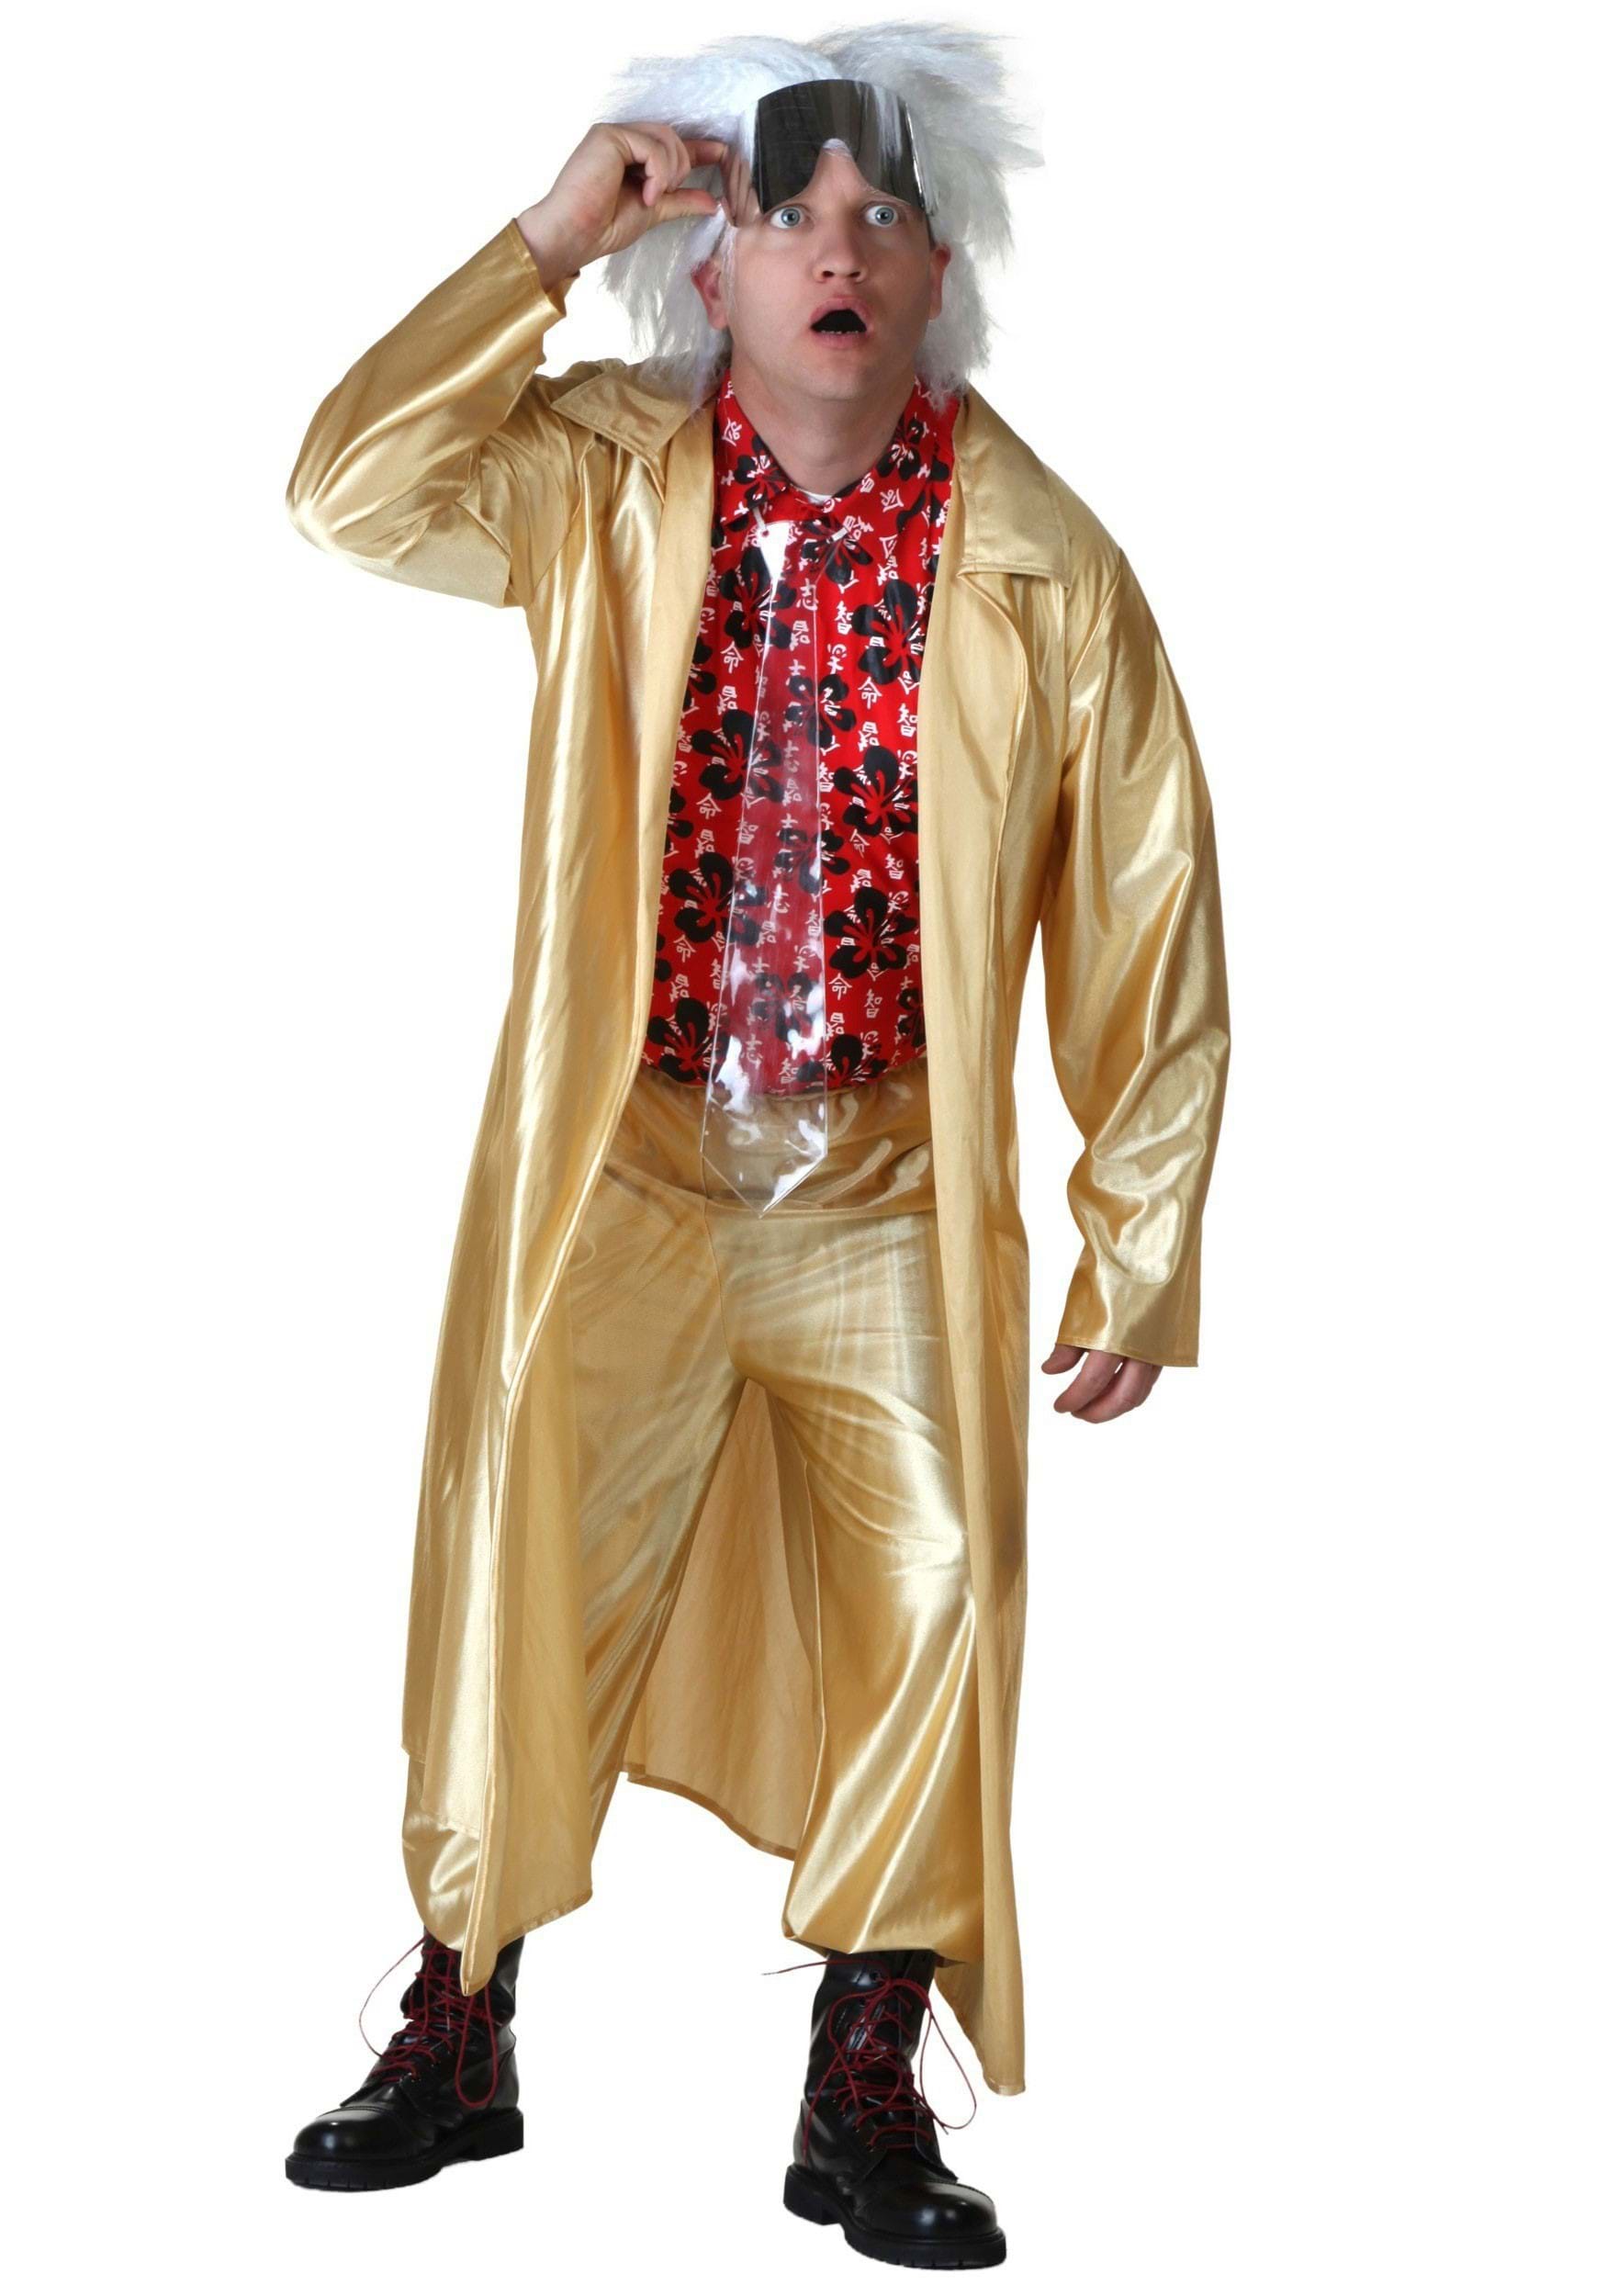 Plus Sized Doc Brown Costume from Back to the Future Part II